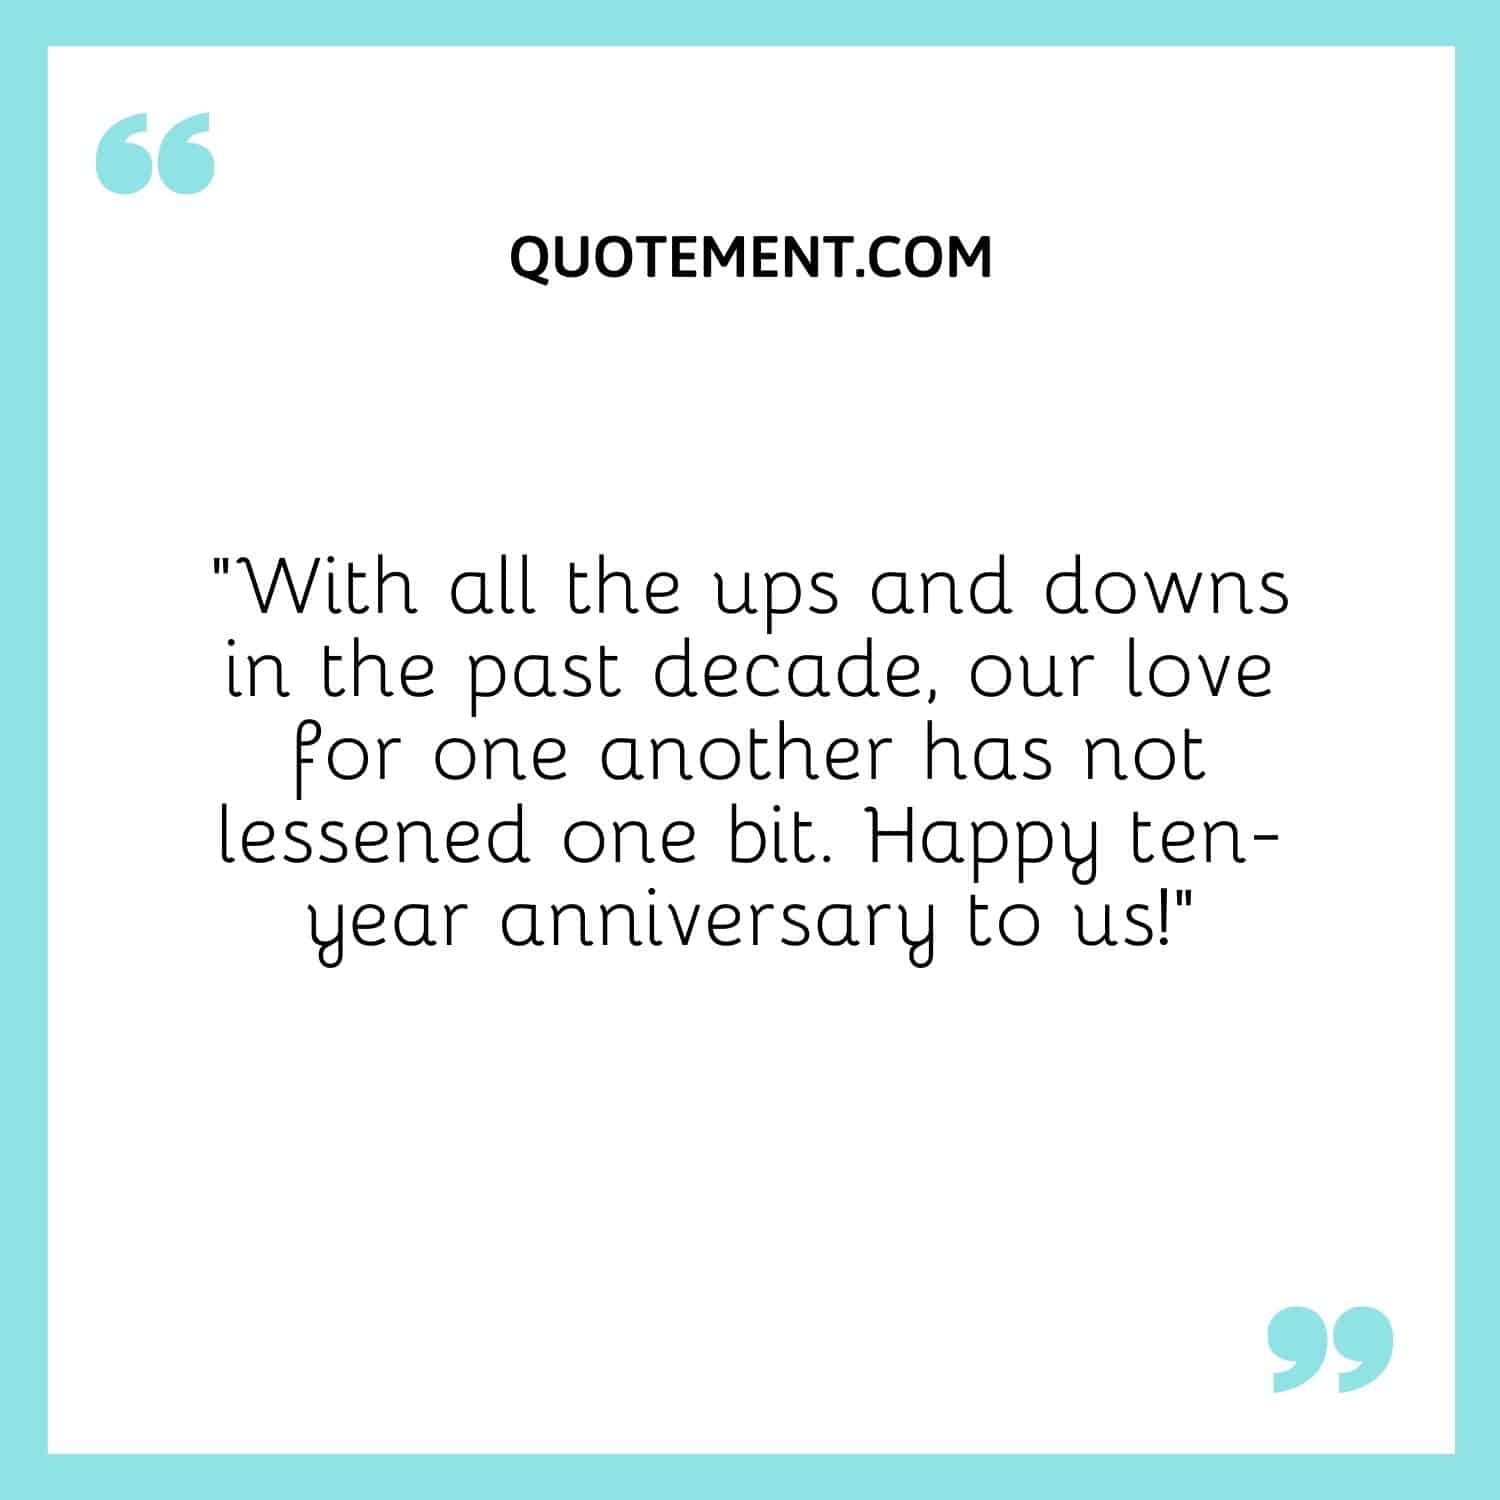 With all the ups and downs in the past decade, our love for one another has not lessened one bit